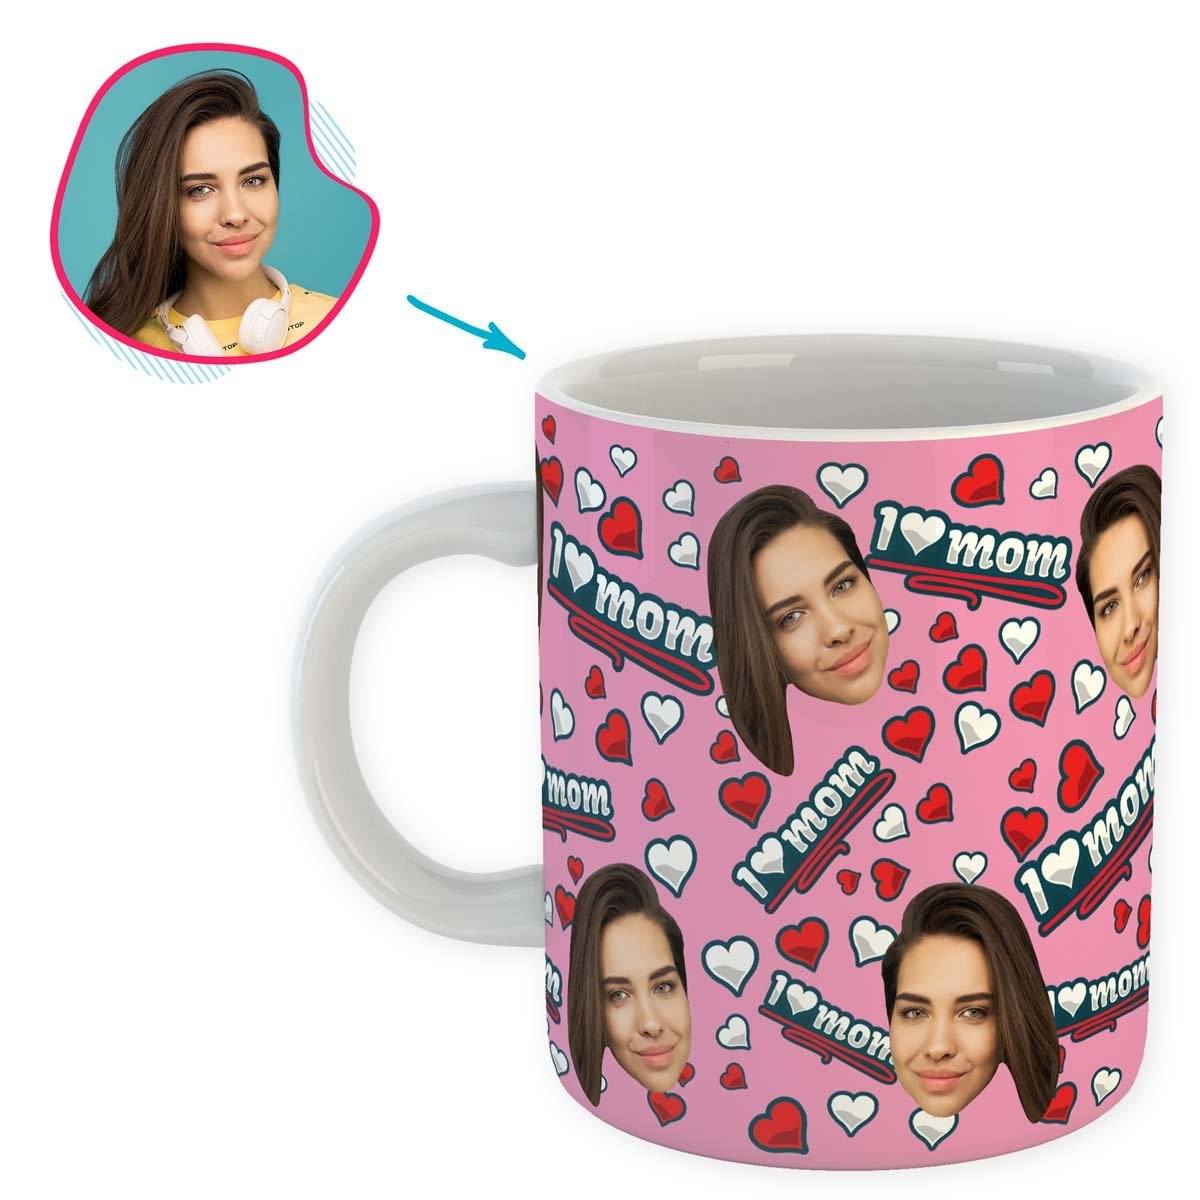 pink Love Mom mug personalized with photo of face printed on it